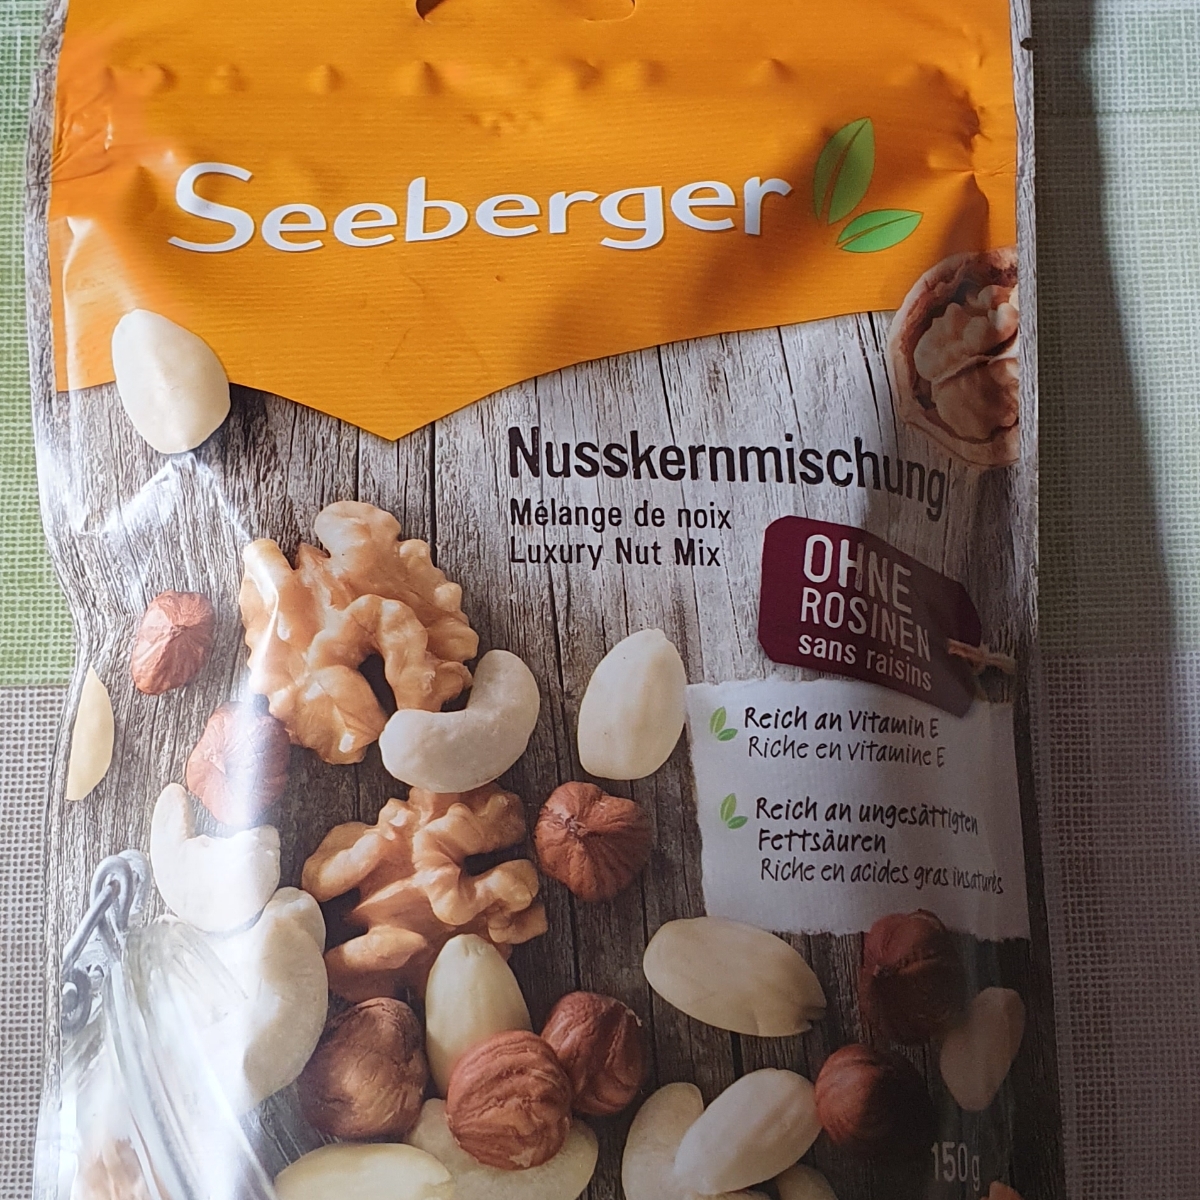 Seeberger: Nuts, dried fruits & high-quality ingredients